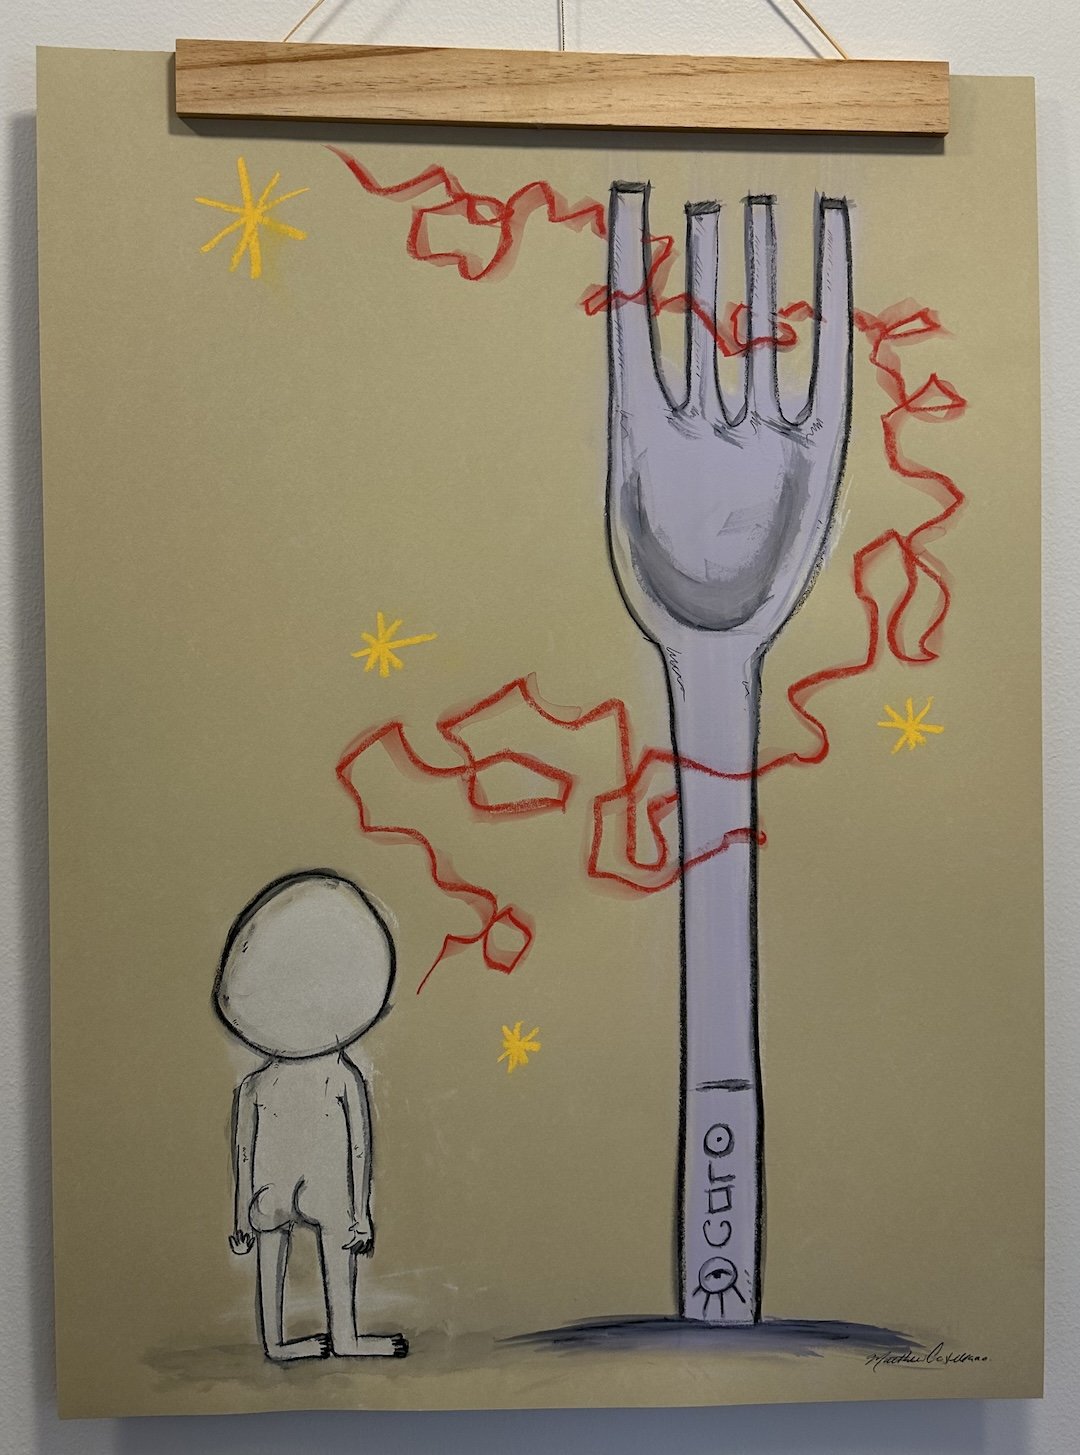    Gold Stars (Fork)  , 30" x 22", watercolor crayon and soft pastel on paper 